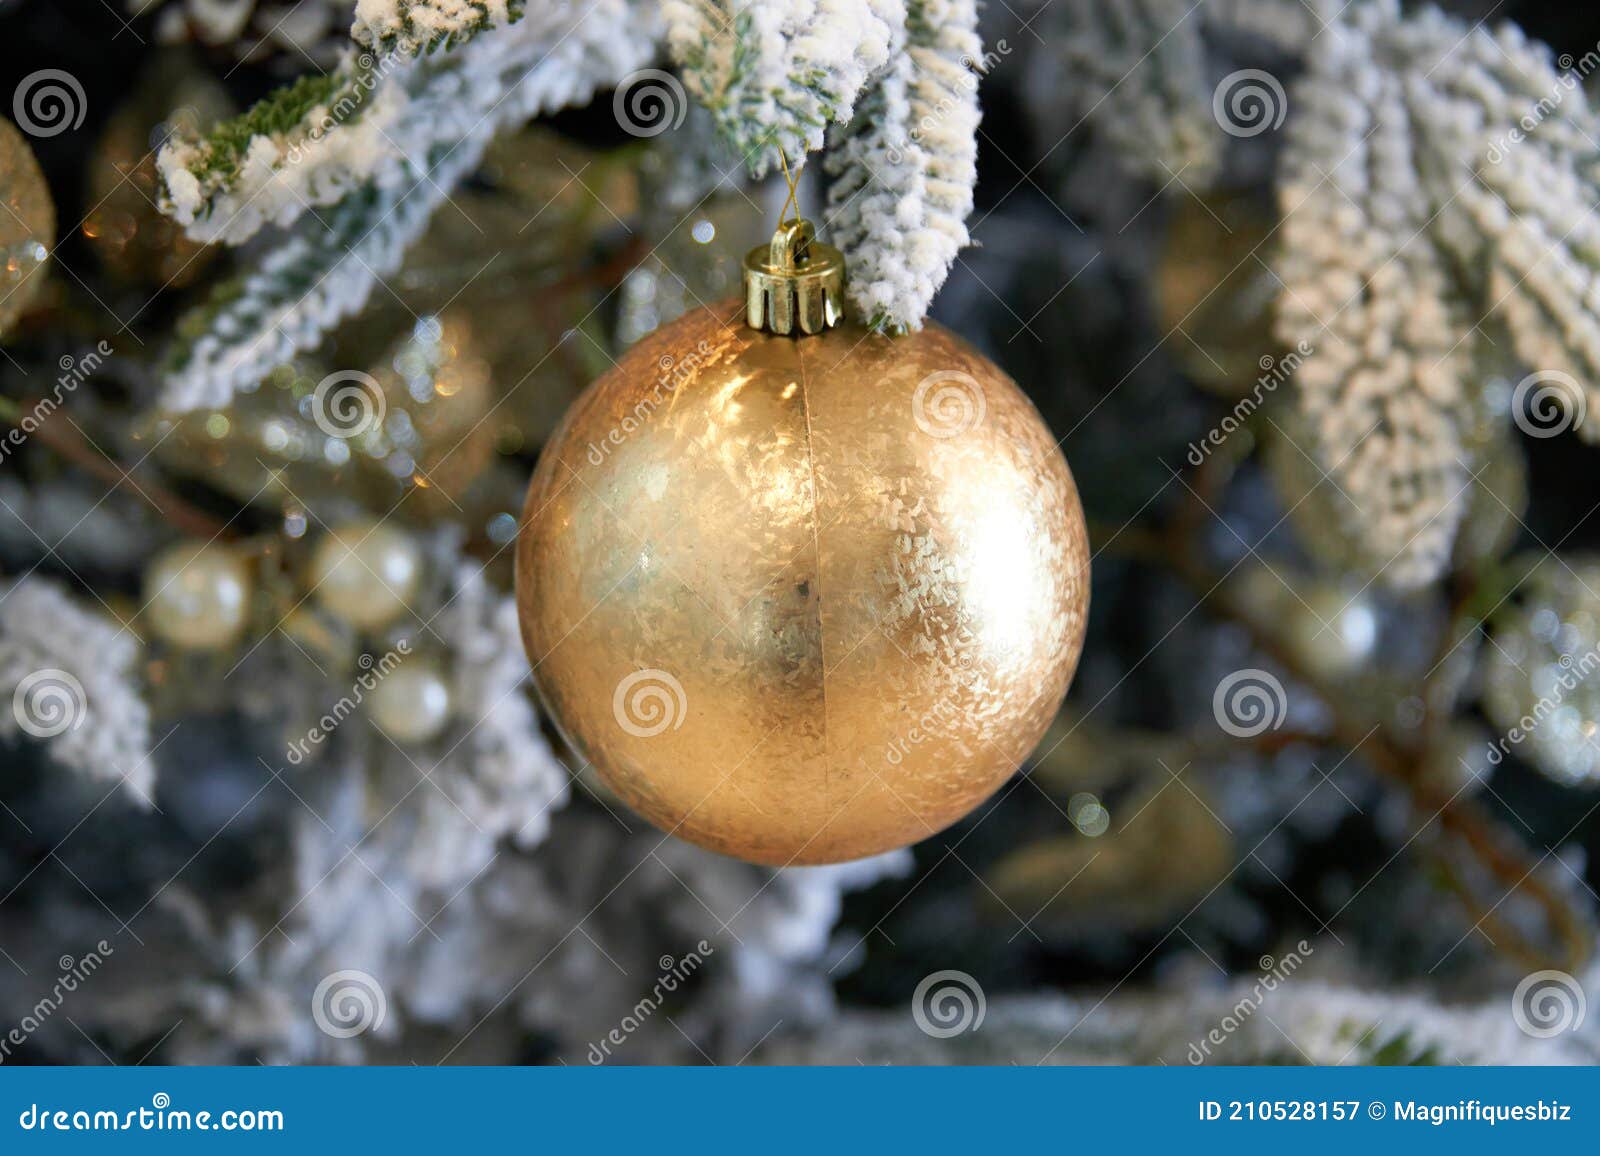 Elegant Christmas Ornaments in Silver and Gold Were Hung on the ...